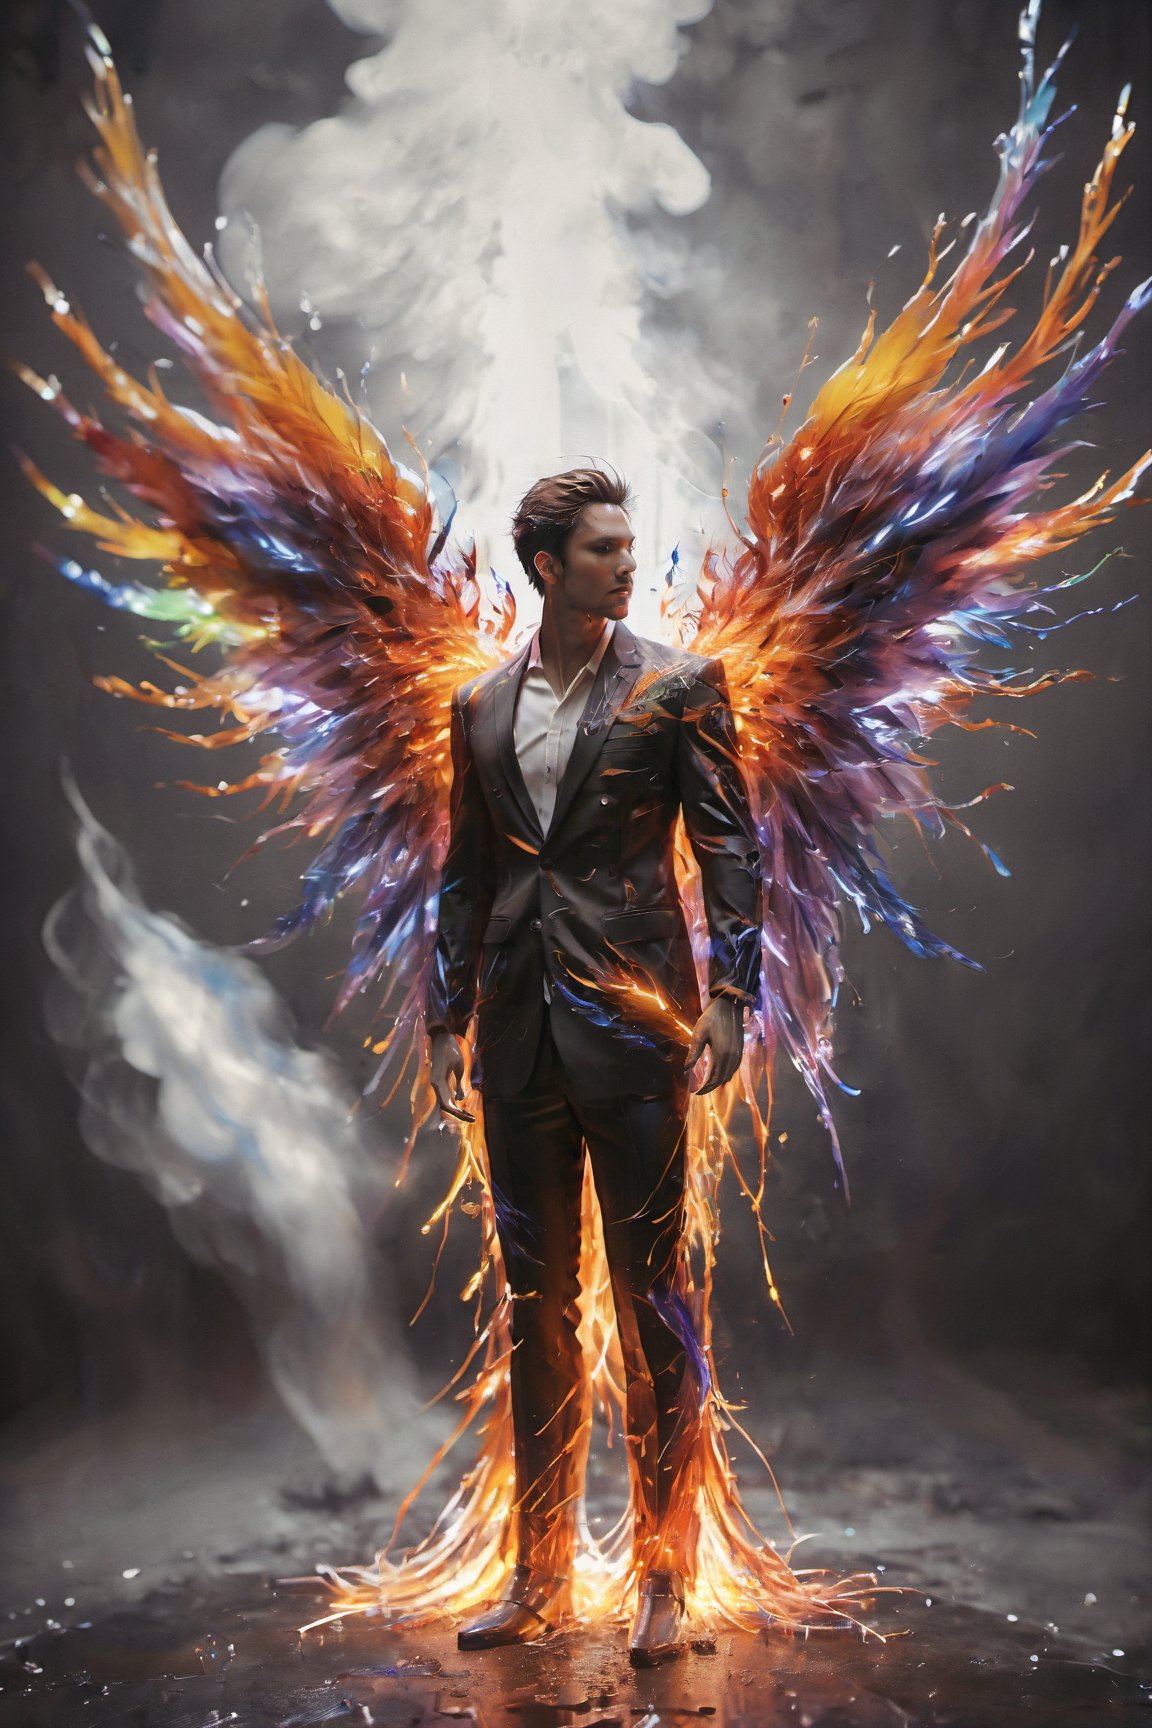 Create an image of a young man wearing a suit, featuring vibrant, thunder wings extending from his back. Random movement The background should be plain white, emphasizing the contrast and detailing of the beauty wings and the sharpness of the suit. The man should appear poised and elegant, with the wings unfurled to showcase a spectrum of vivid hues, blending seamlessly from one color to another. The focus should be on the meticulous details of the wings’ feathers and the suit’s fabric, capturing a harmonious blend of natural and refined elements, wings,Stylish, close up,l3min,xxmixgirl,fire element,wings,ice and water,composed of elements of thunder,thunder,electricity